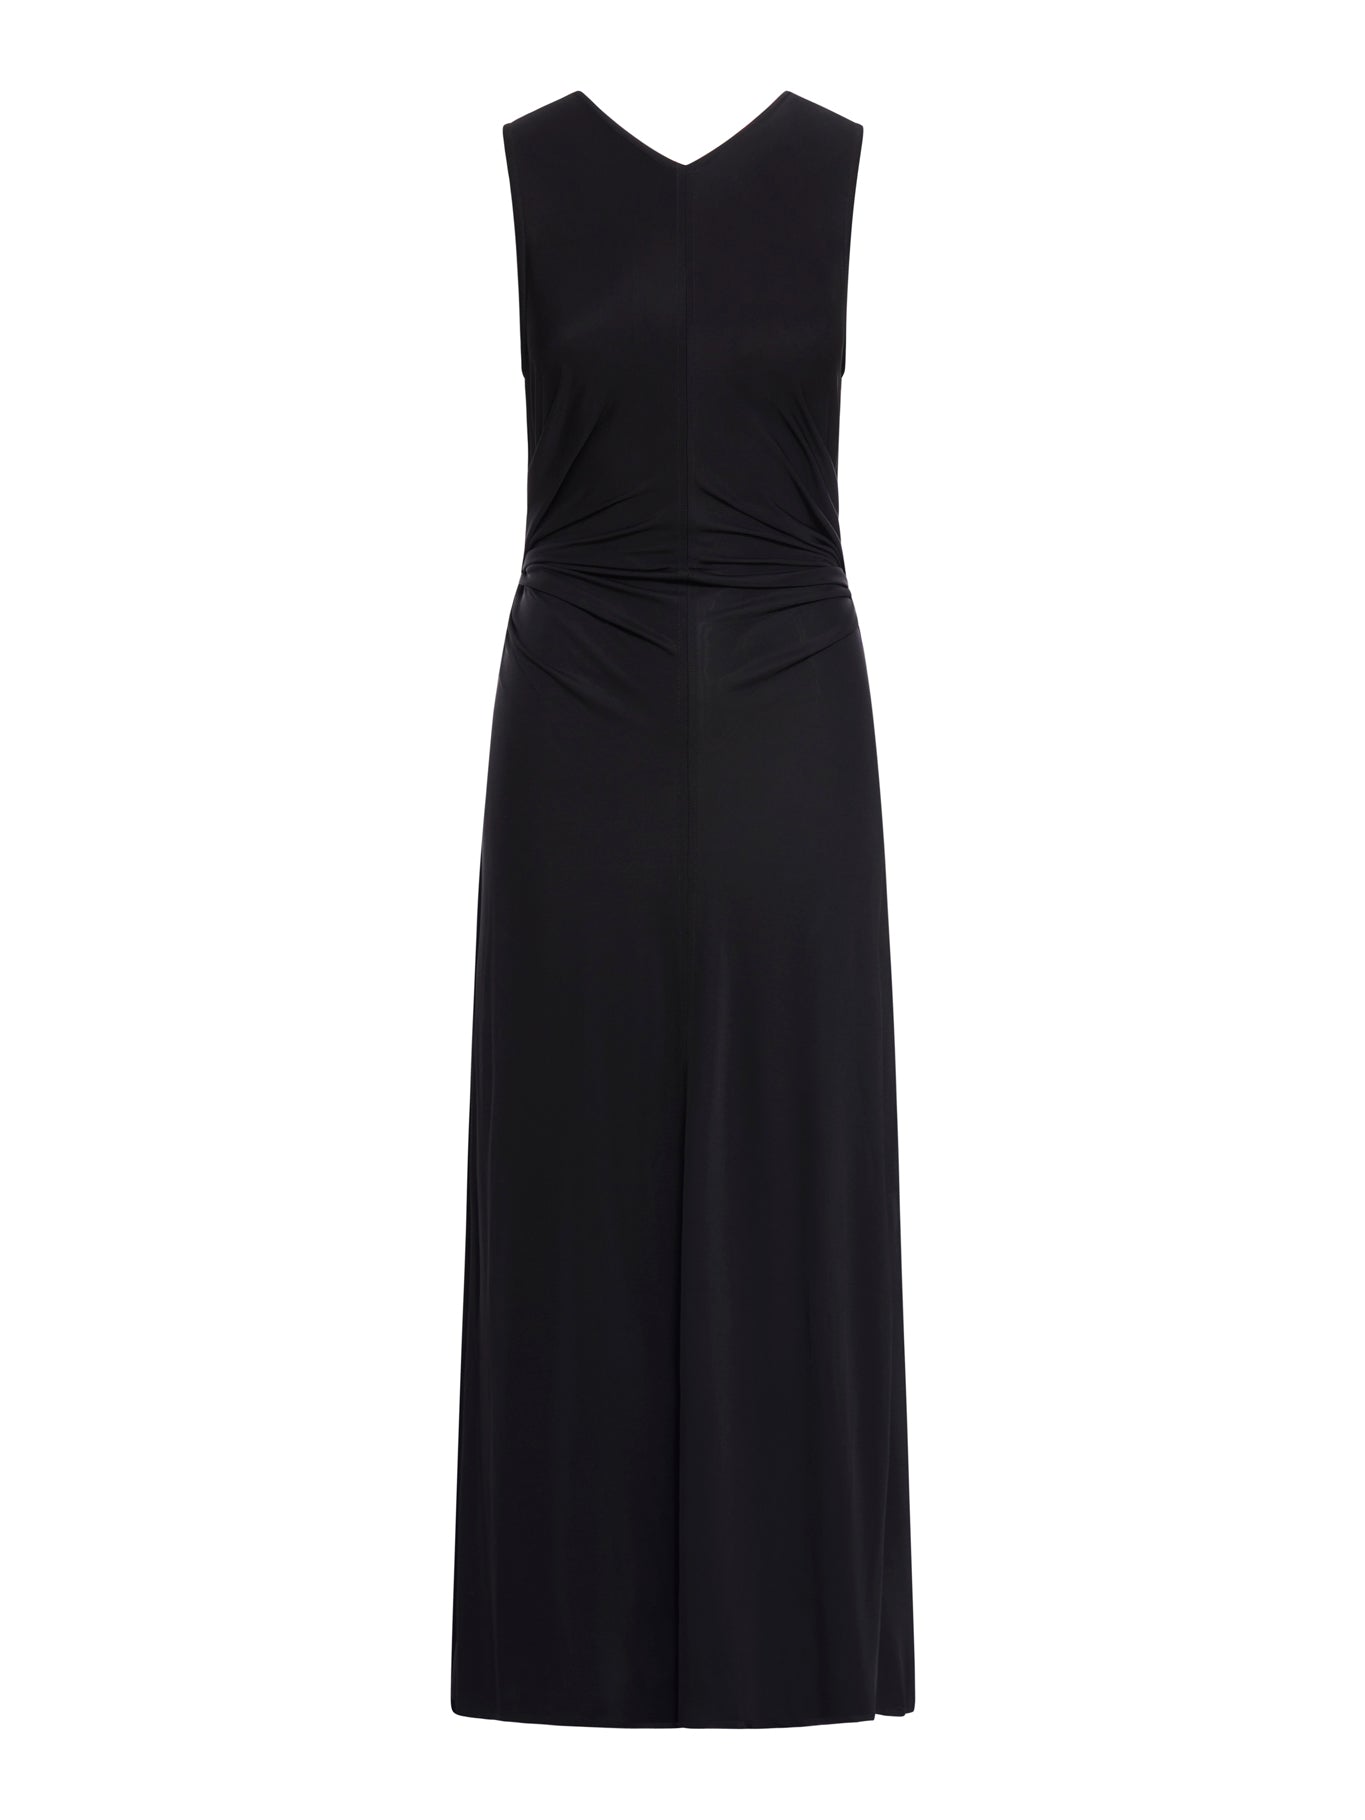 Long dress in viscose jersey with knot ring